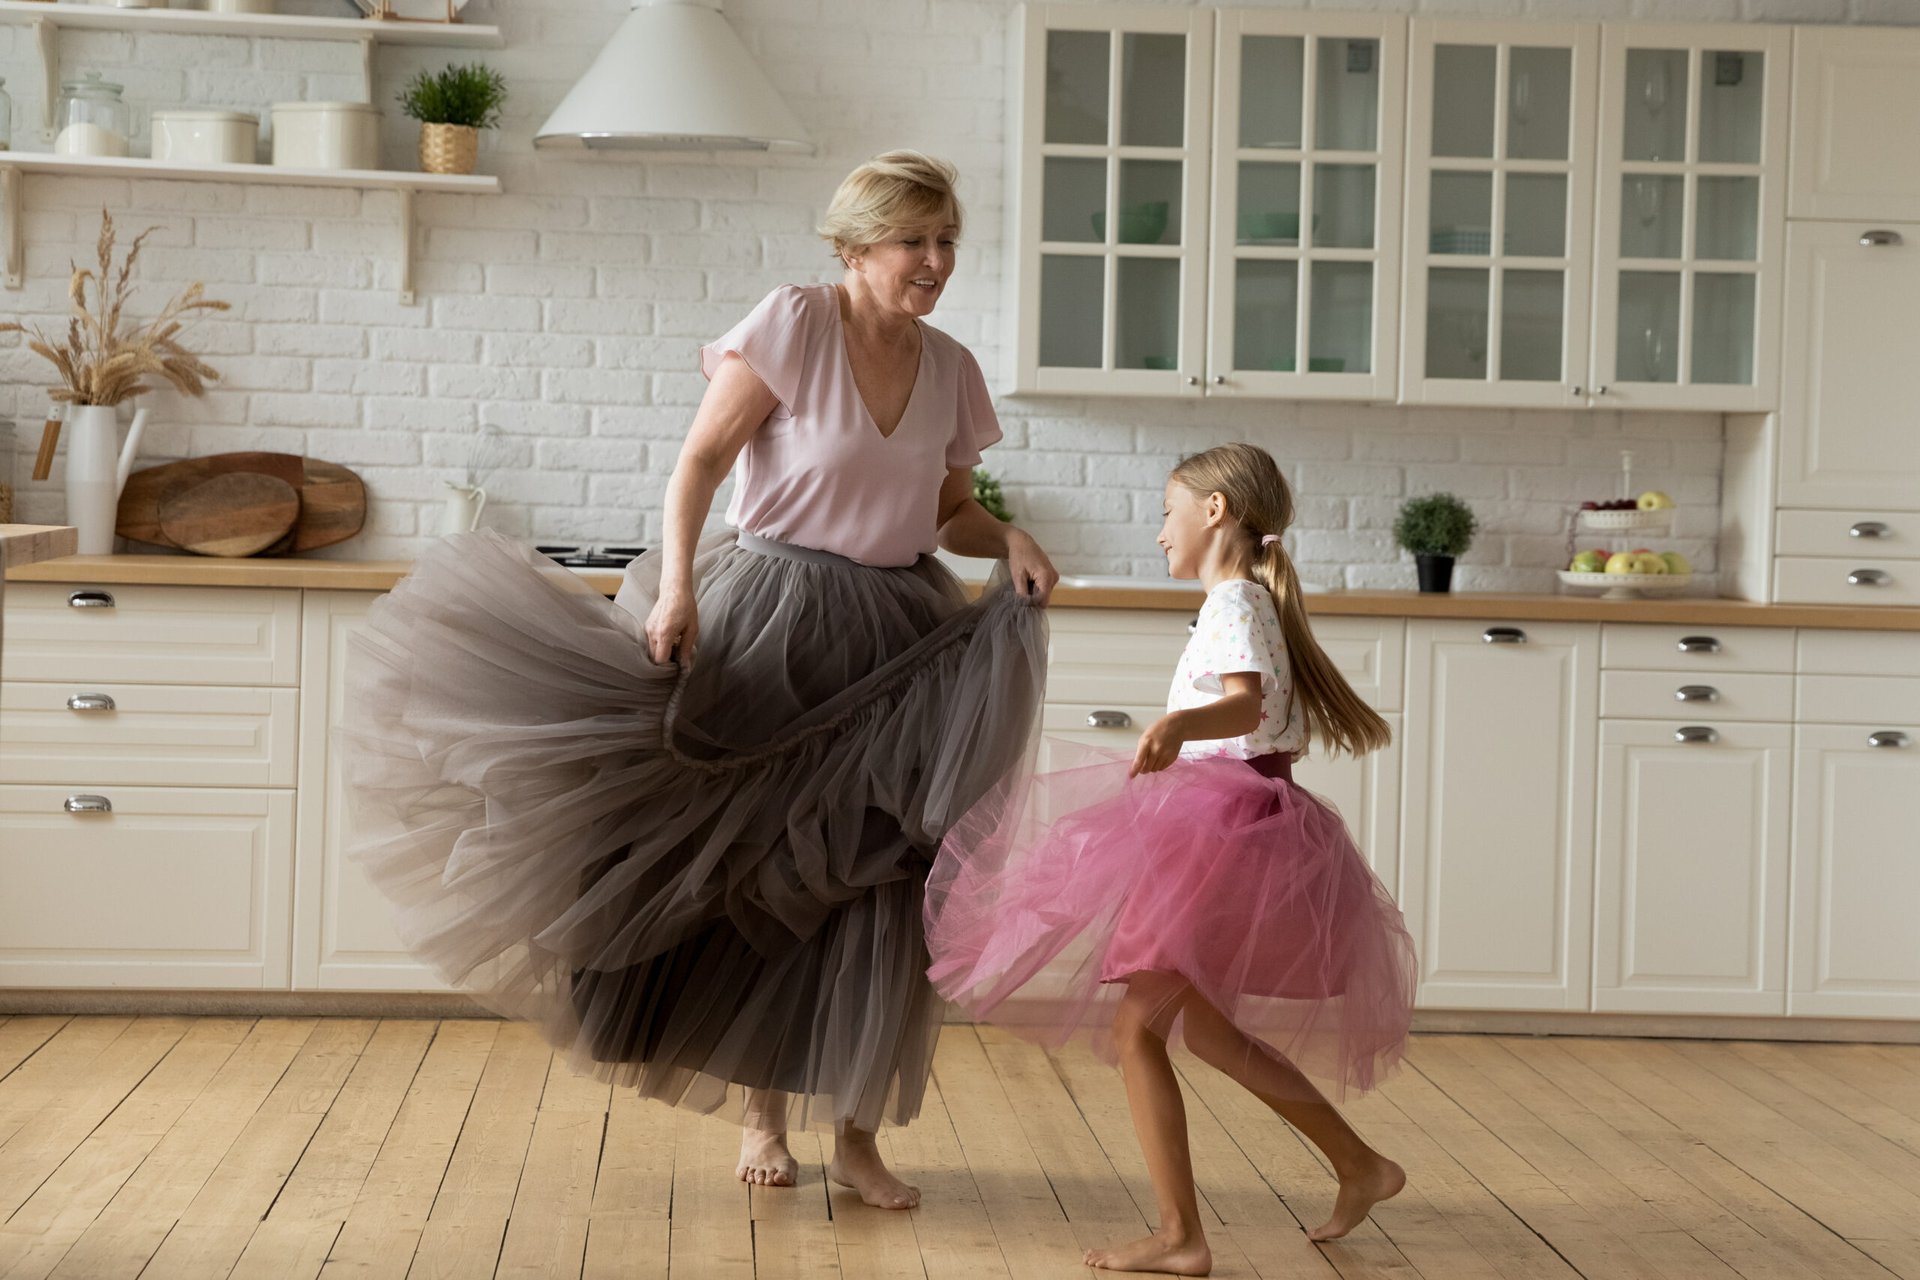 Grandma and granddaughter dancing in a kitchen